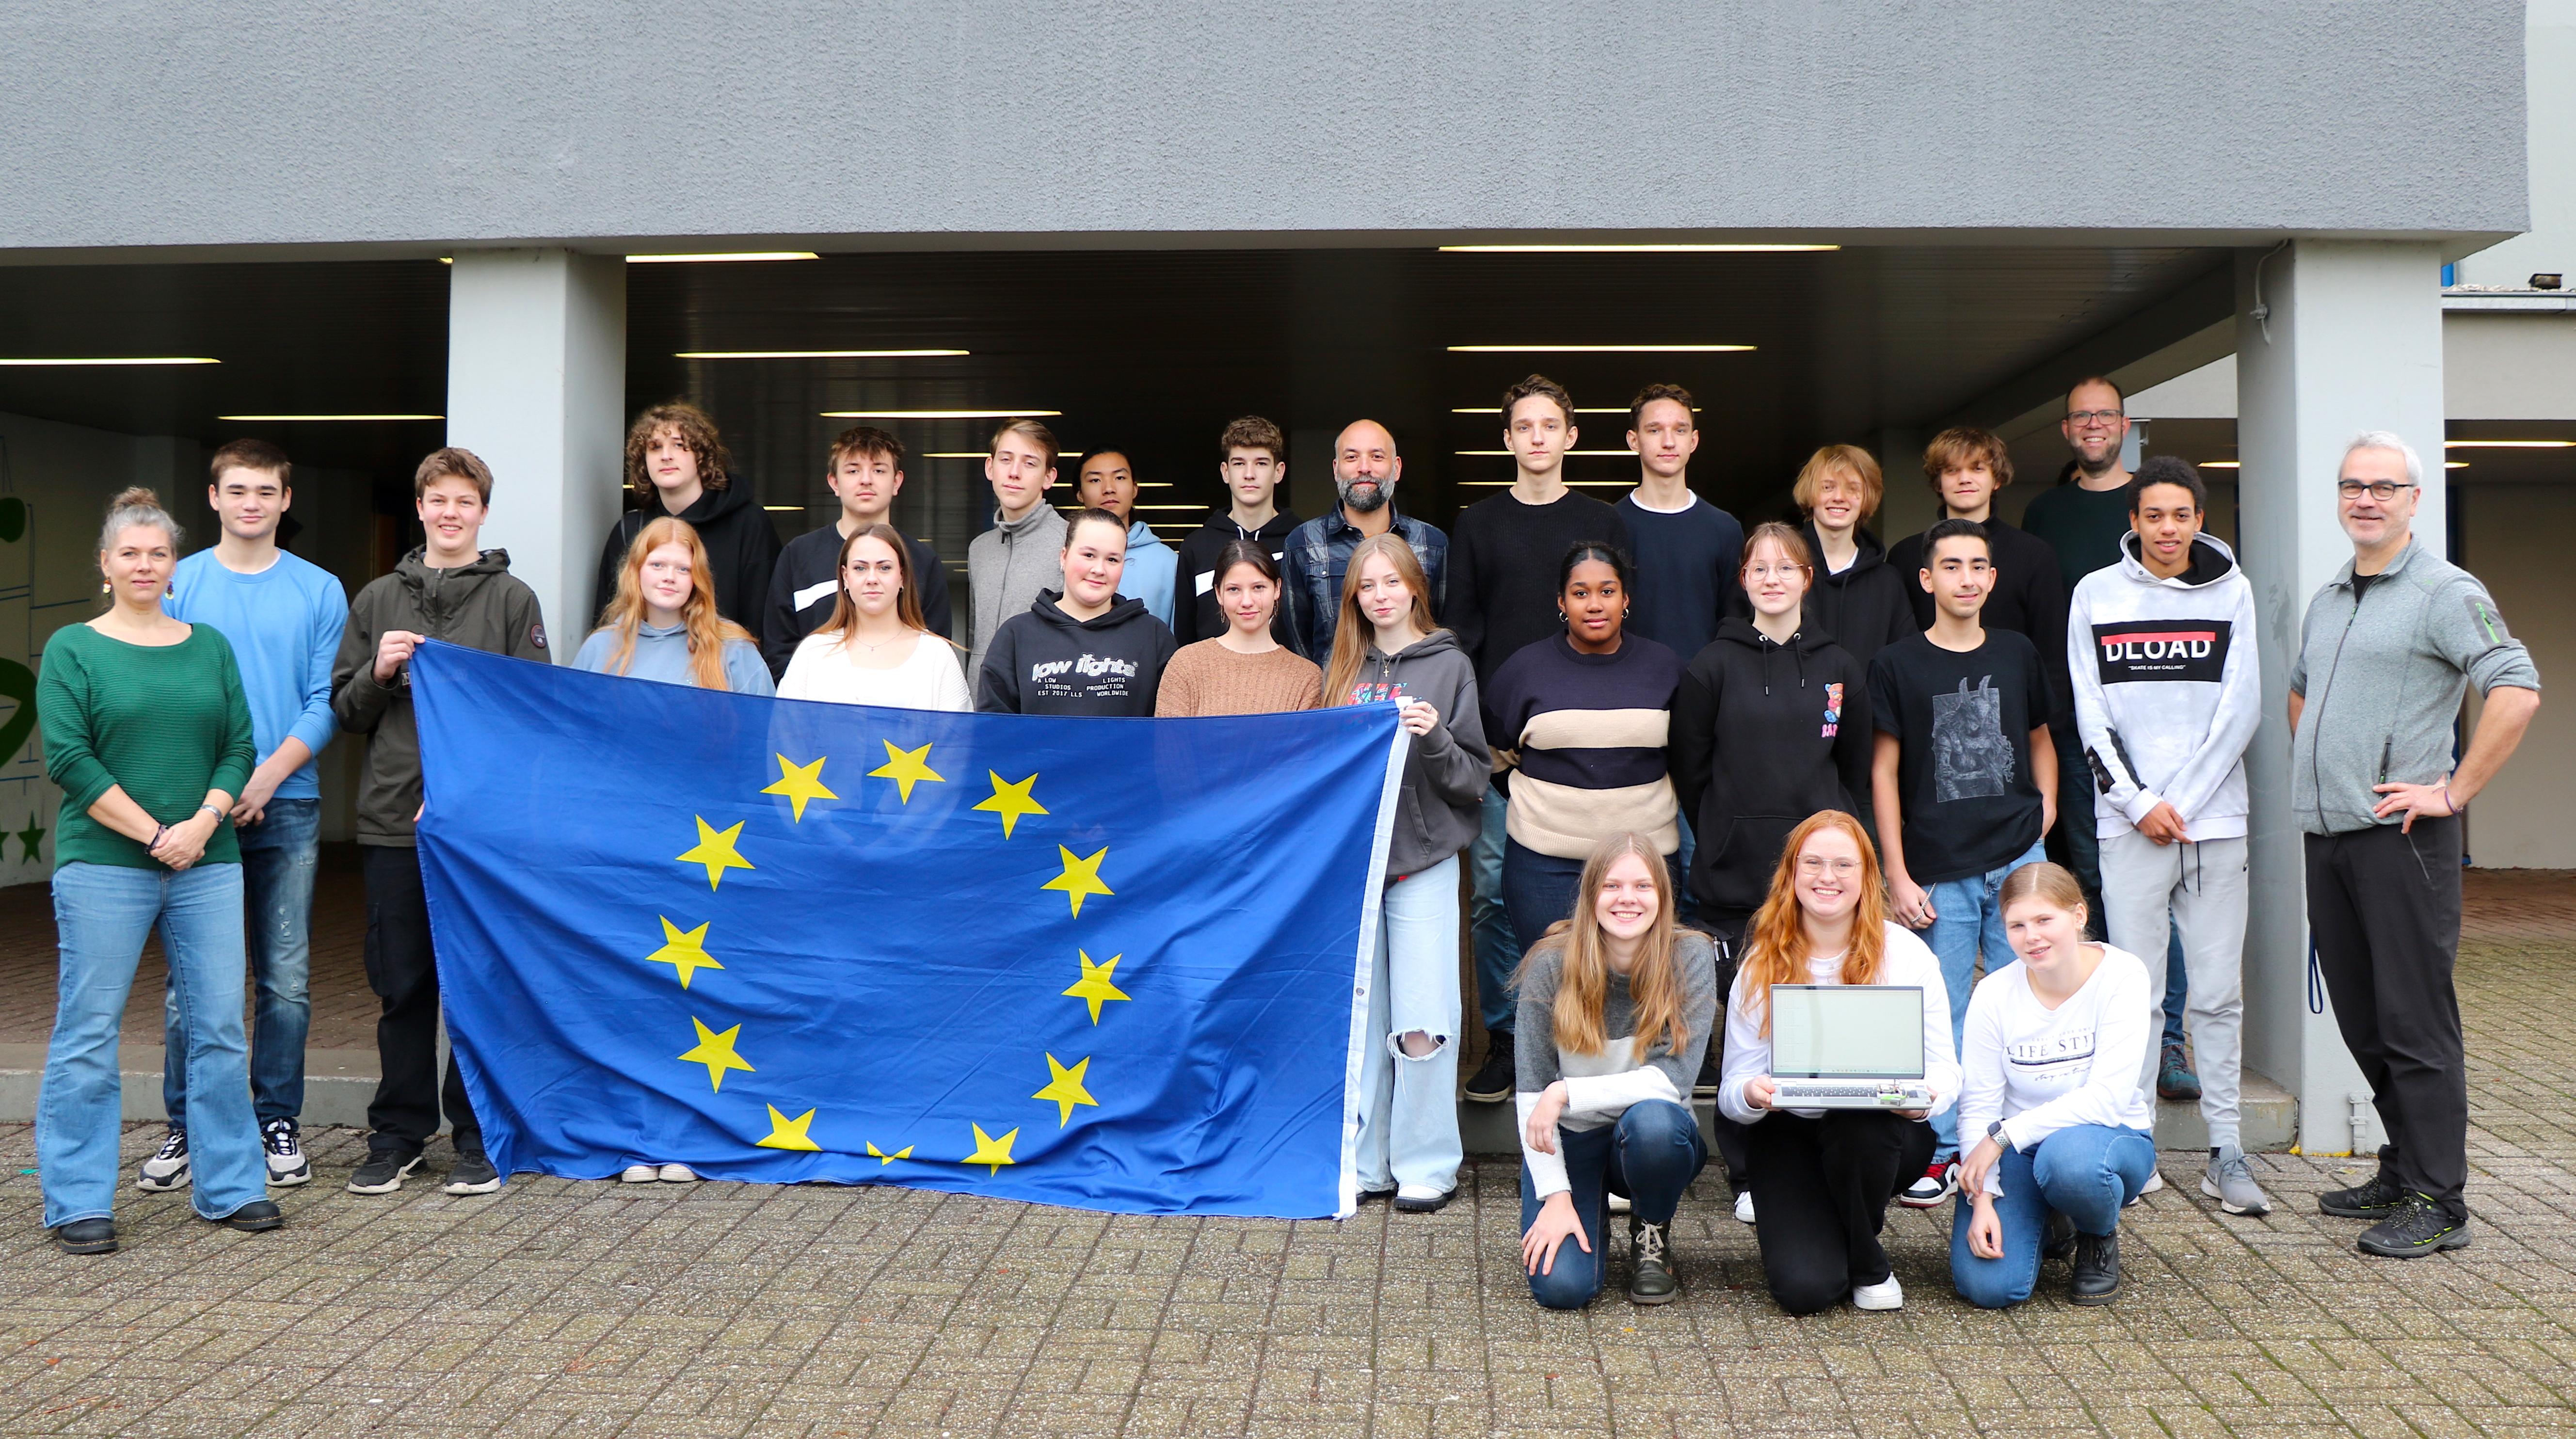 Group foto with all students who did the project and our German counterparts, also with the teachers who contributed.